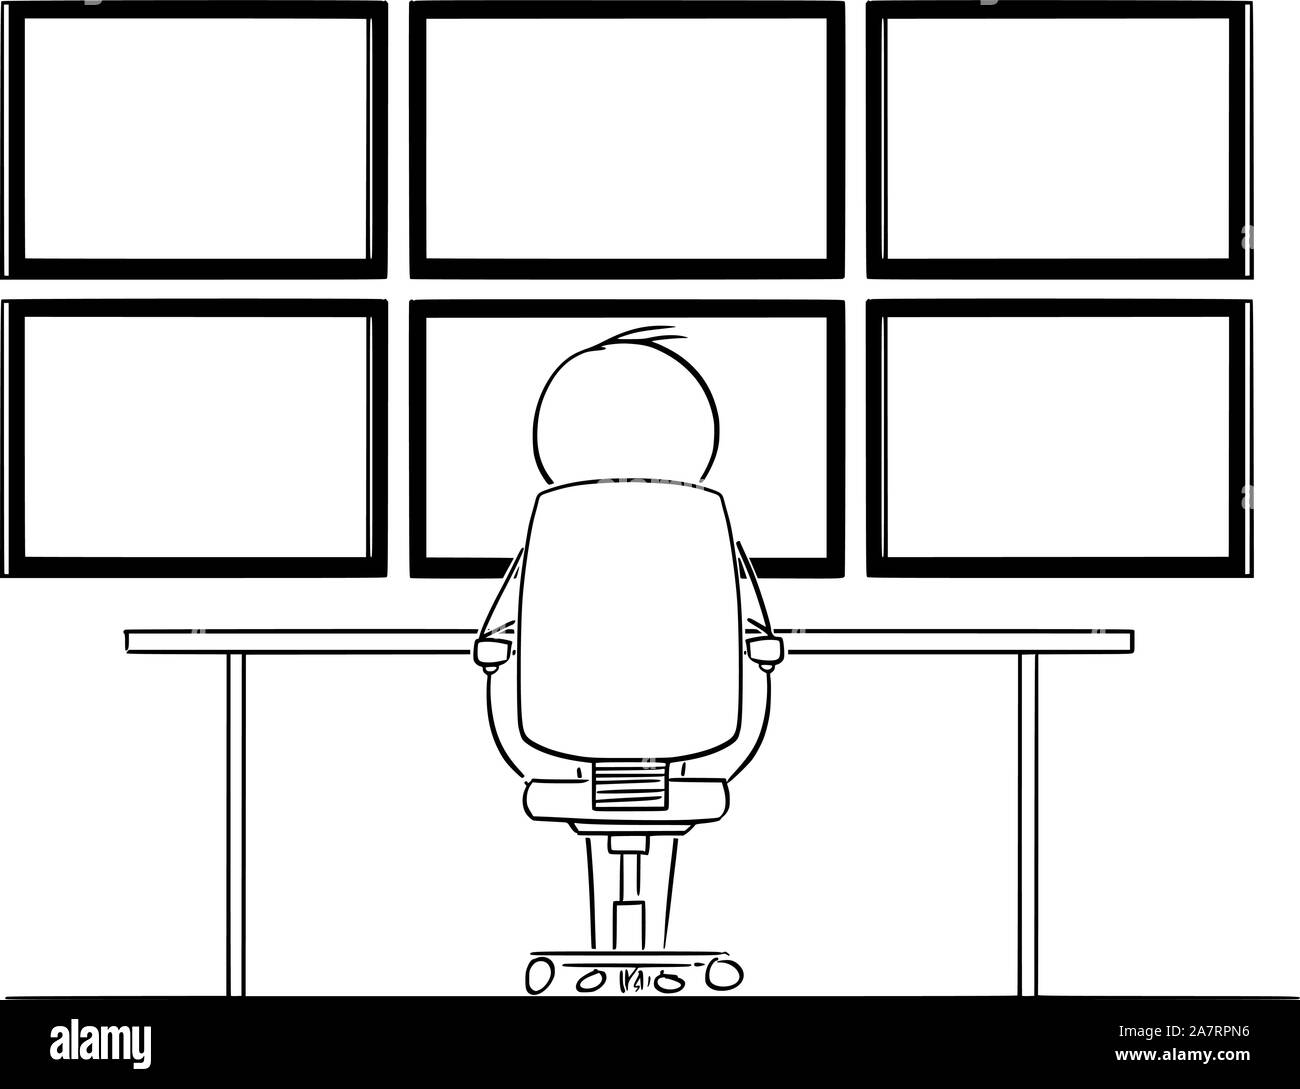 Vector cartoon stick figure drawing conceptual illustration of man, hacker or businessman sitting in front of six computer monitors mounted on wall hacking or analyzing data. Stock Vector